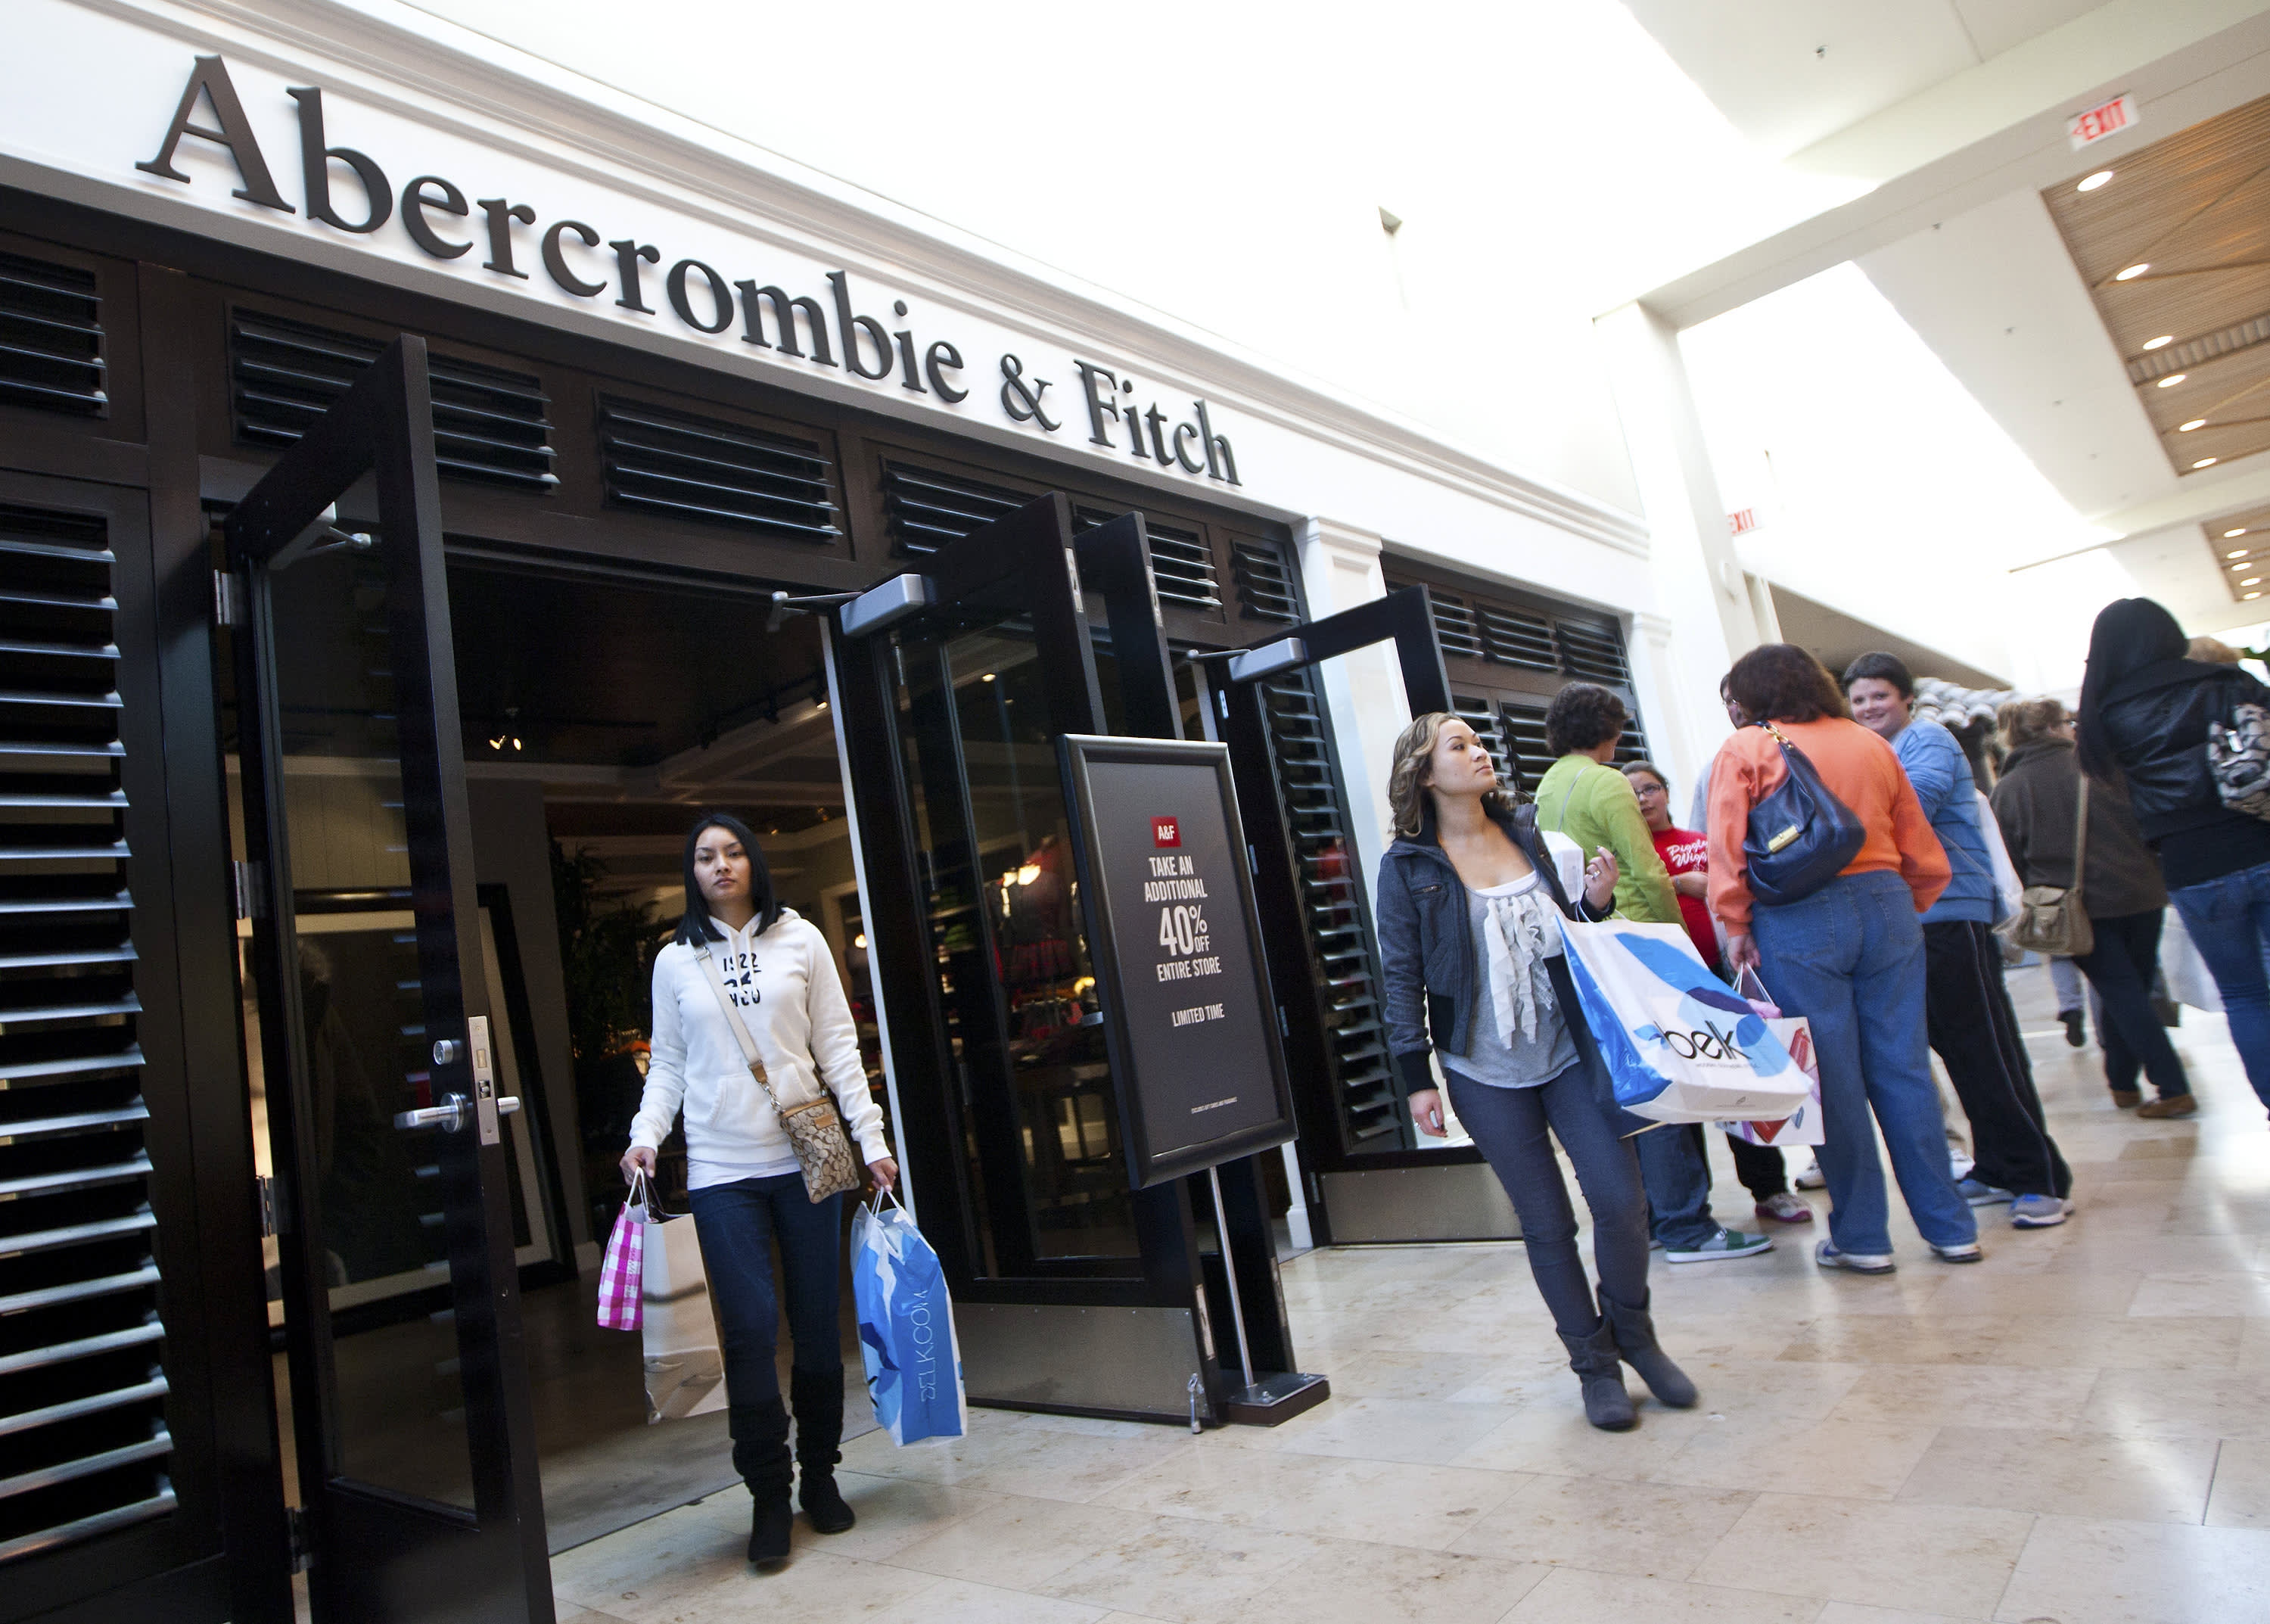 abercrombie & fitch near me